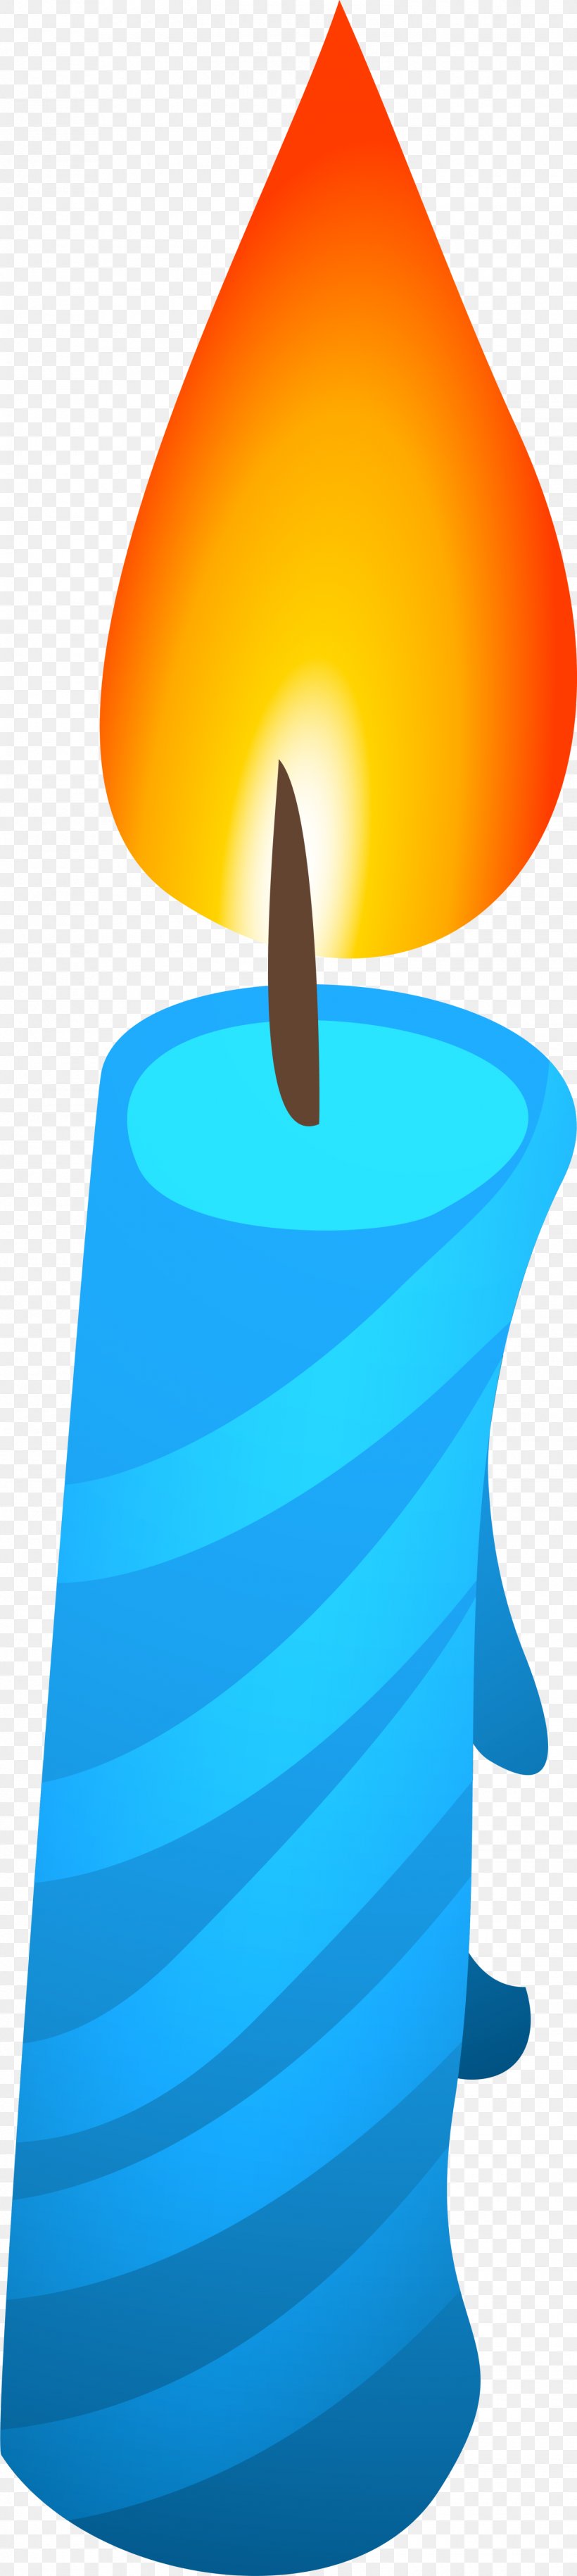 Candlestick Clip Art, PNG, 1500x6695px, Candlestick, Blue, Candle, Cone, Search Engine Download Free